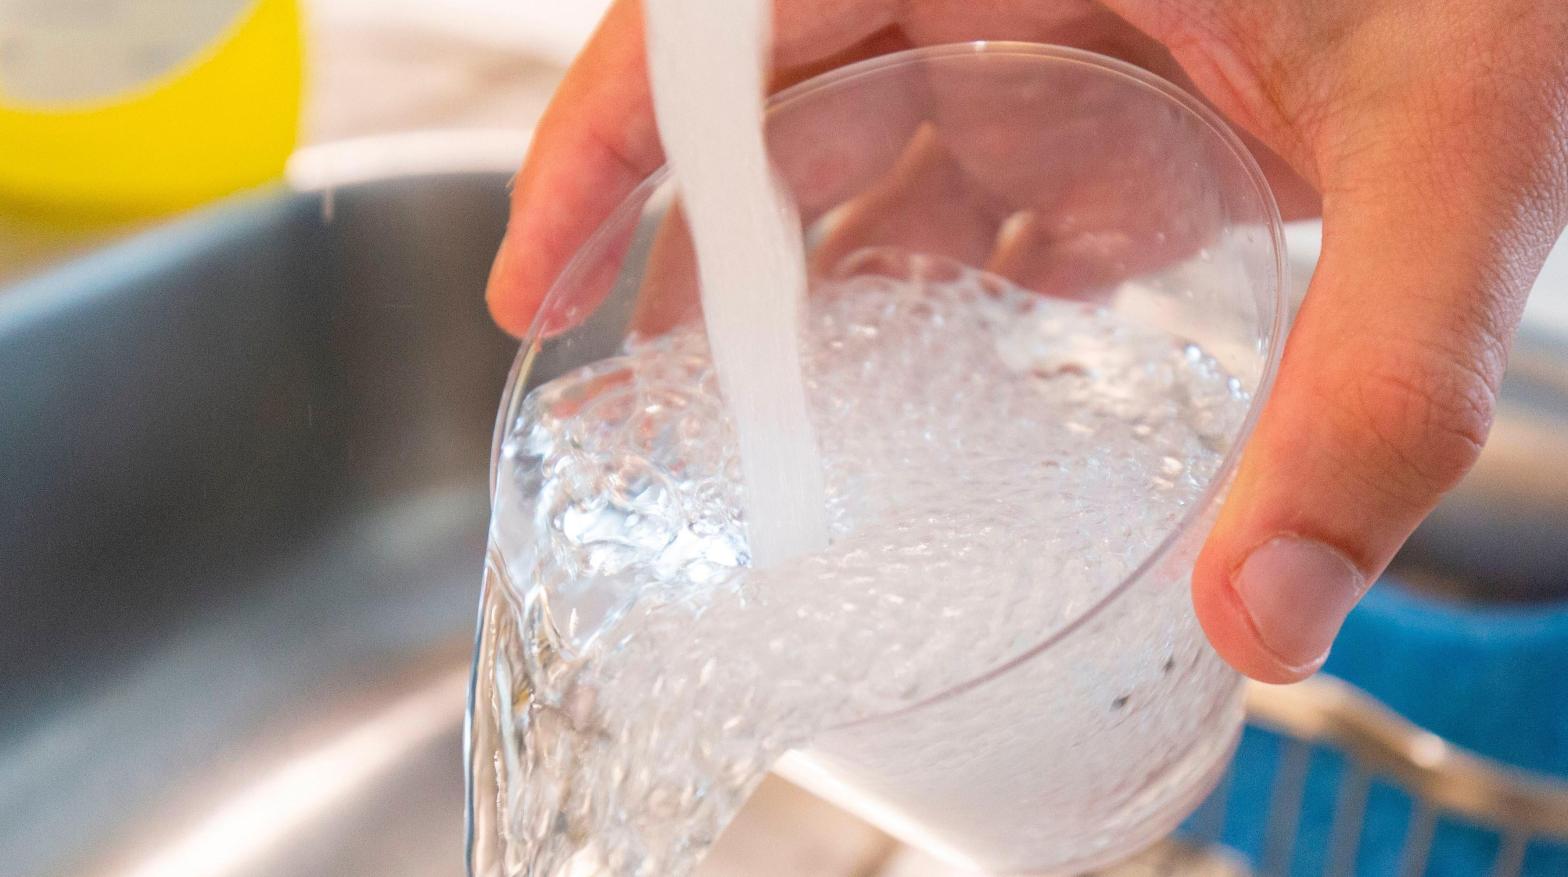 Conspiracies of fluoride in tap water range from claims of ill-health effects to fears of foreign powers working to weaken U.S. citizens' bodies. (Photo: ALASTAIR PIKE/AFP, Getty Images)